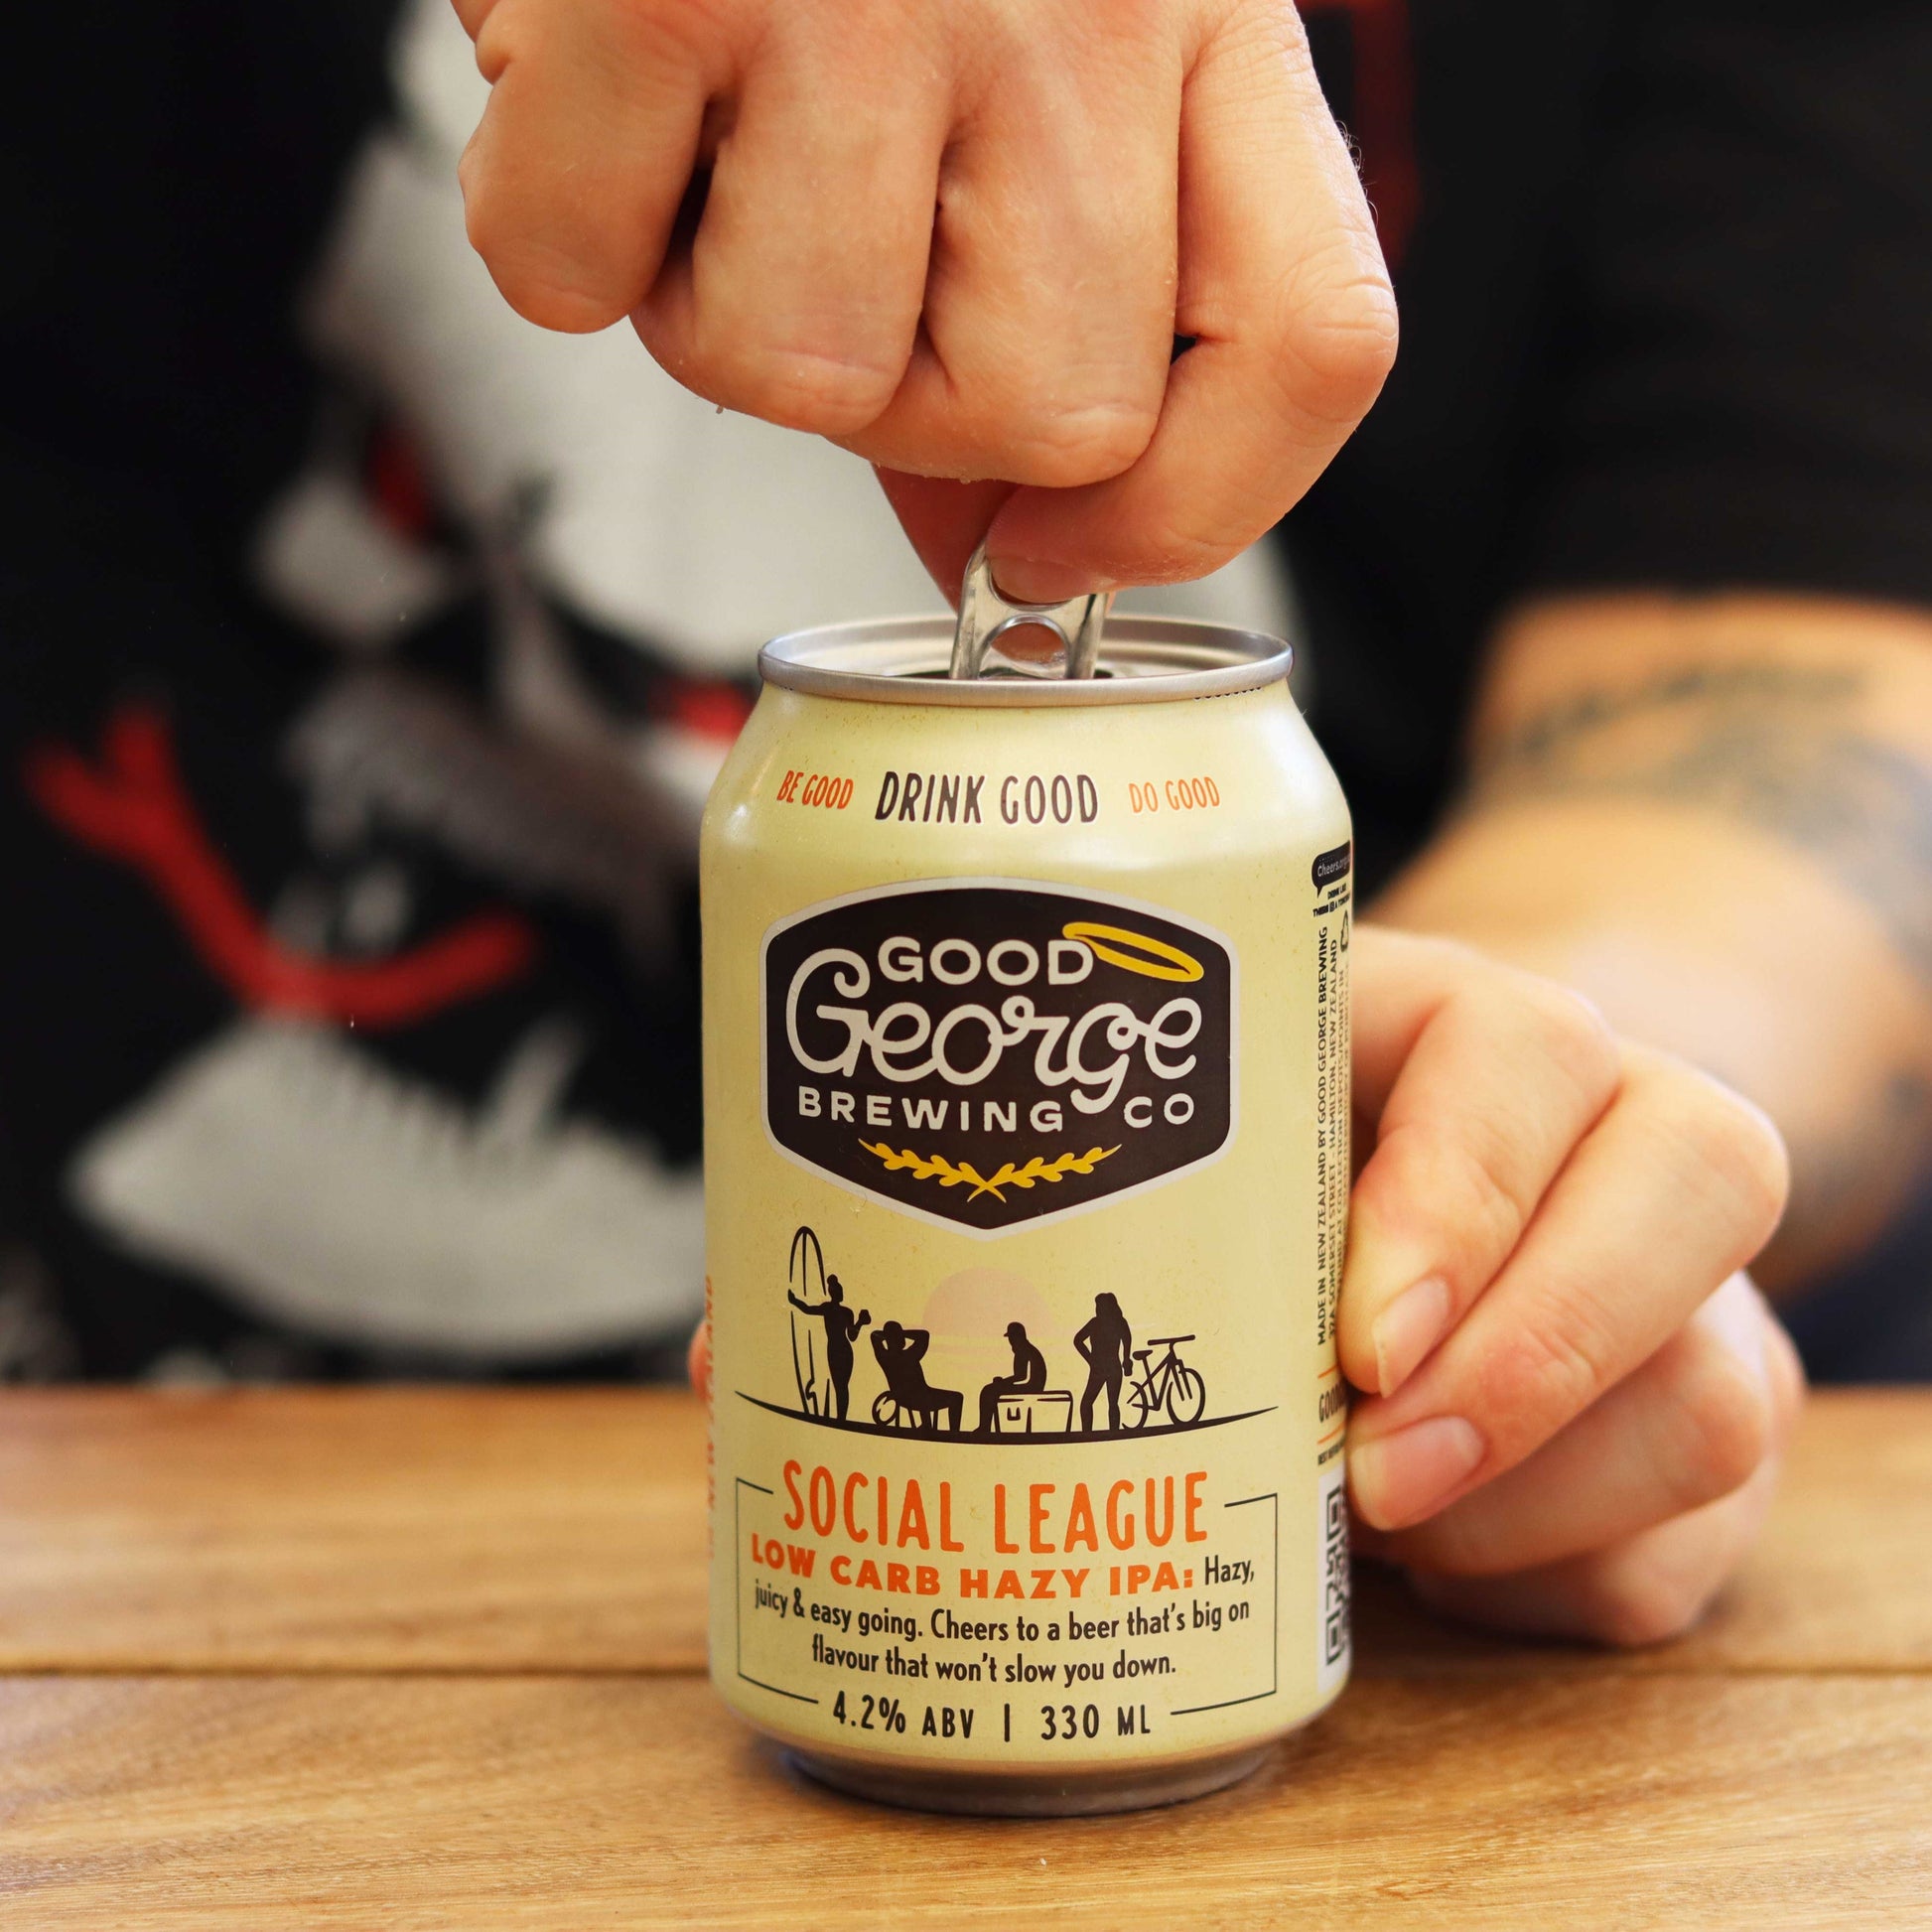 Good George Social League Low Carb Hazy IPA Can getting opened